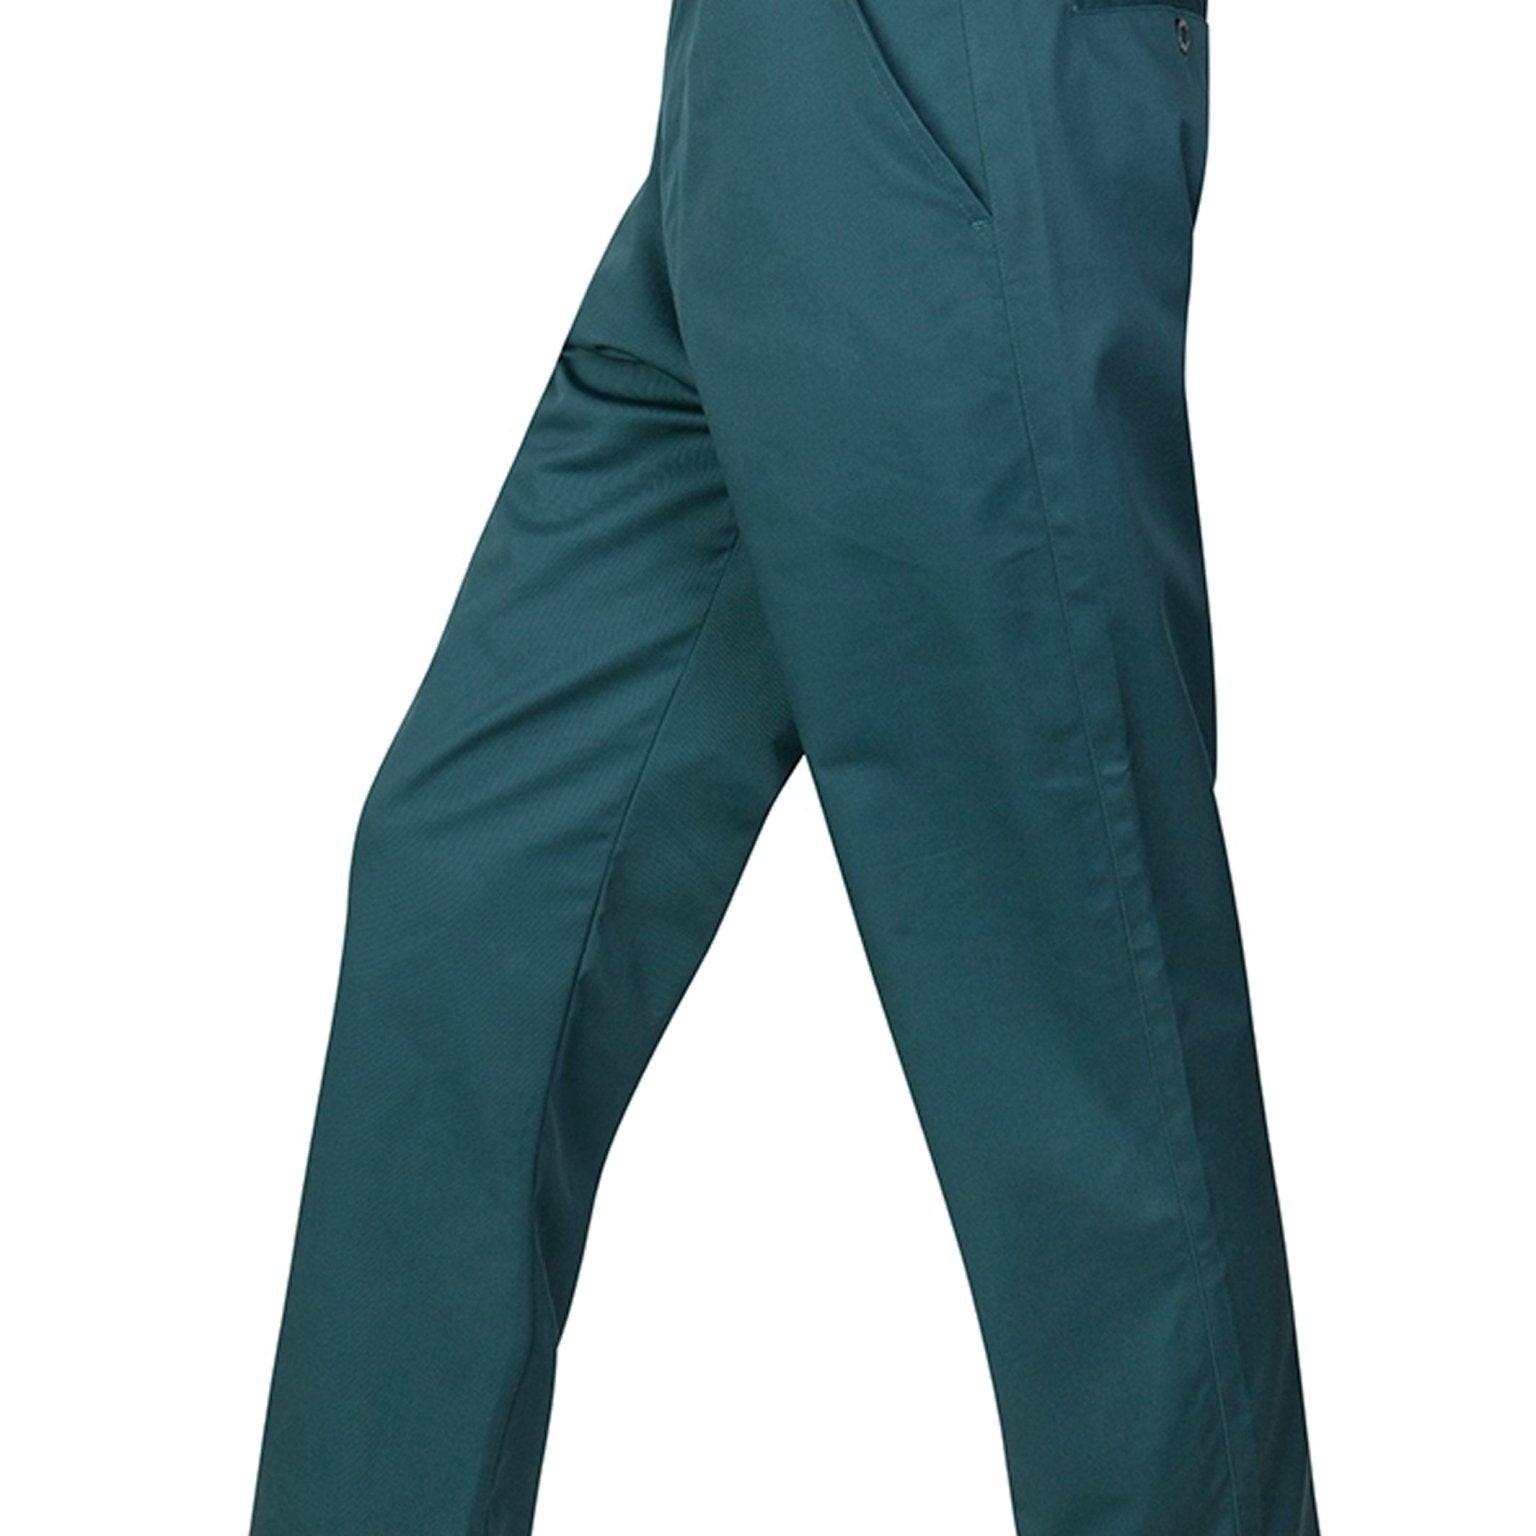 4elementsclothingHoggs of FifeHoggs of Fife - Mens Trousers - mens work trousers Stretch Durable Bushwhacker UnlinedTrousers & JeansBWSU/SP/S32